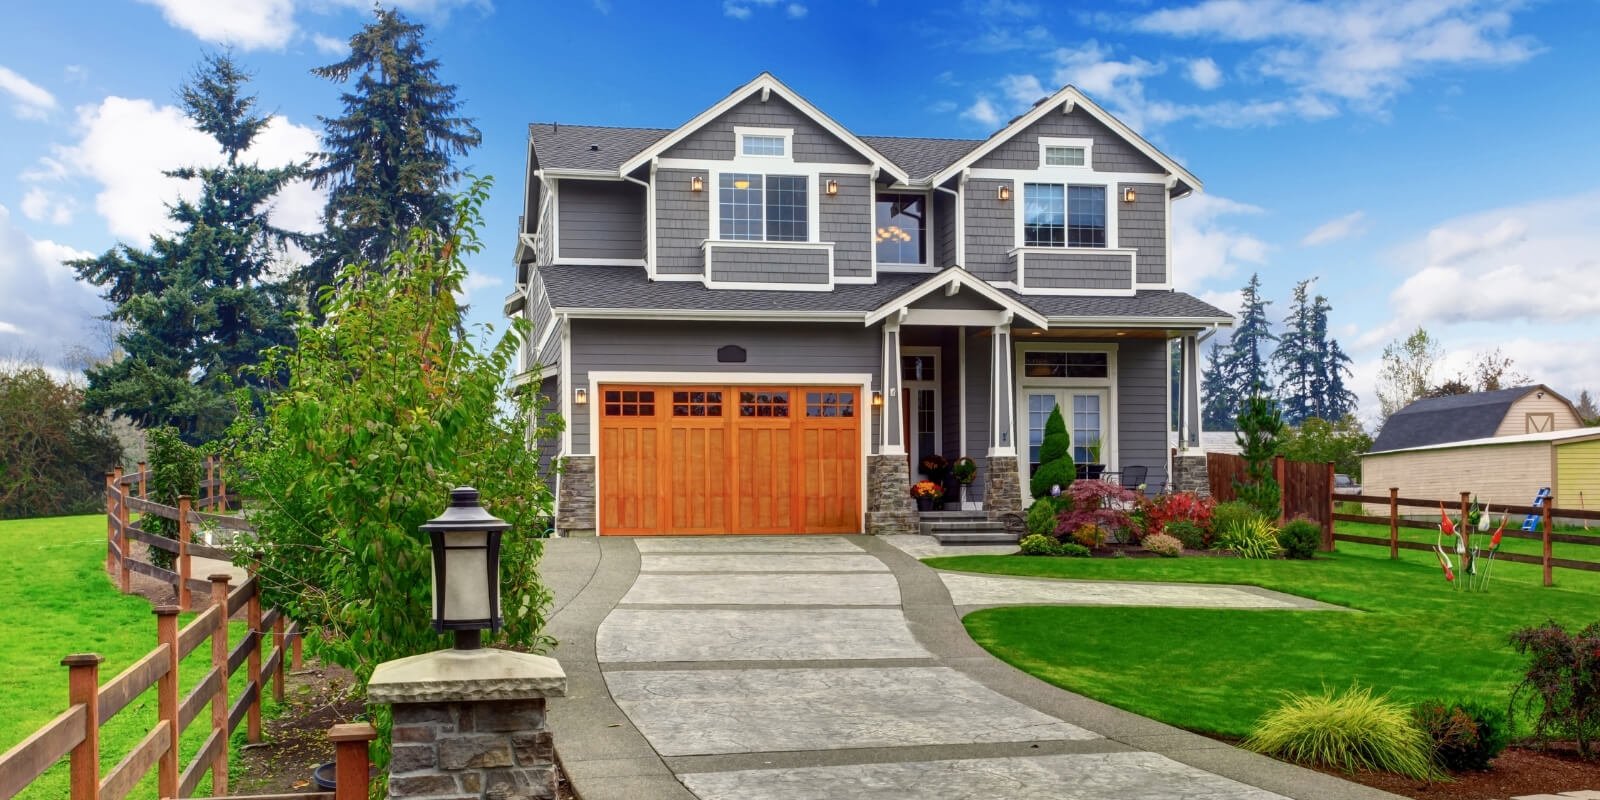 4. Upgrade Curb Appeal